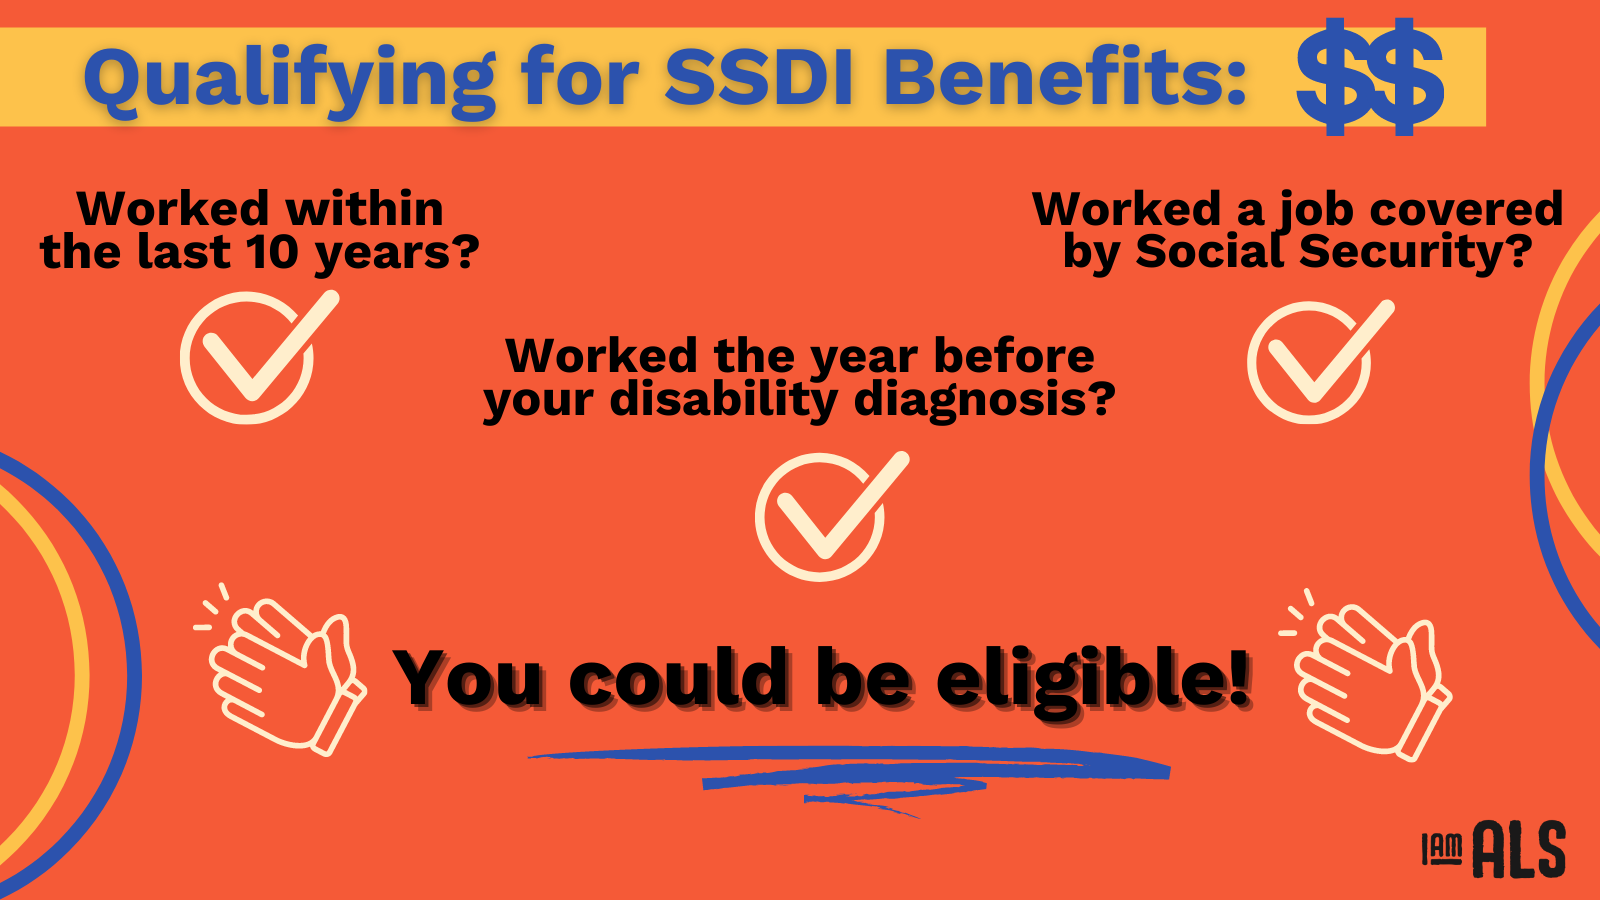 Everything you need to know about social security disability insurance